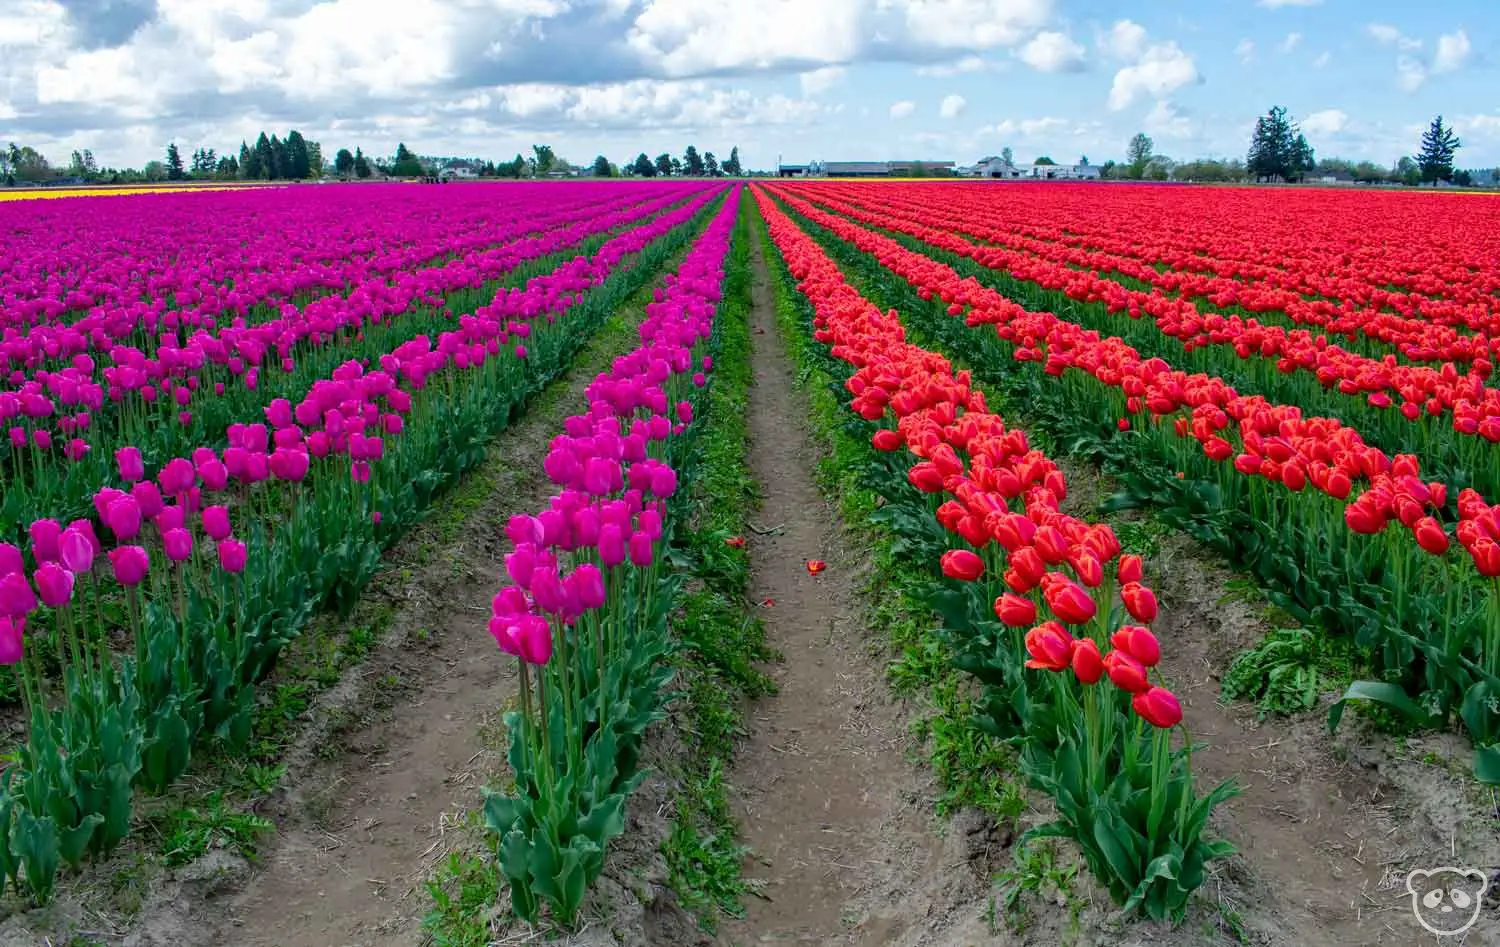 Rows of 2 different solid colored tulips.